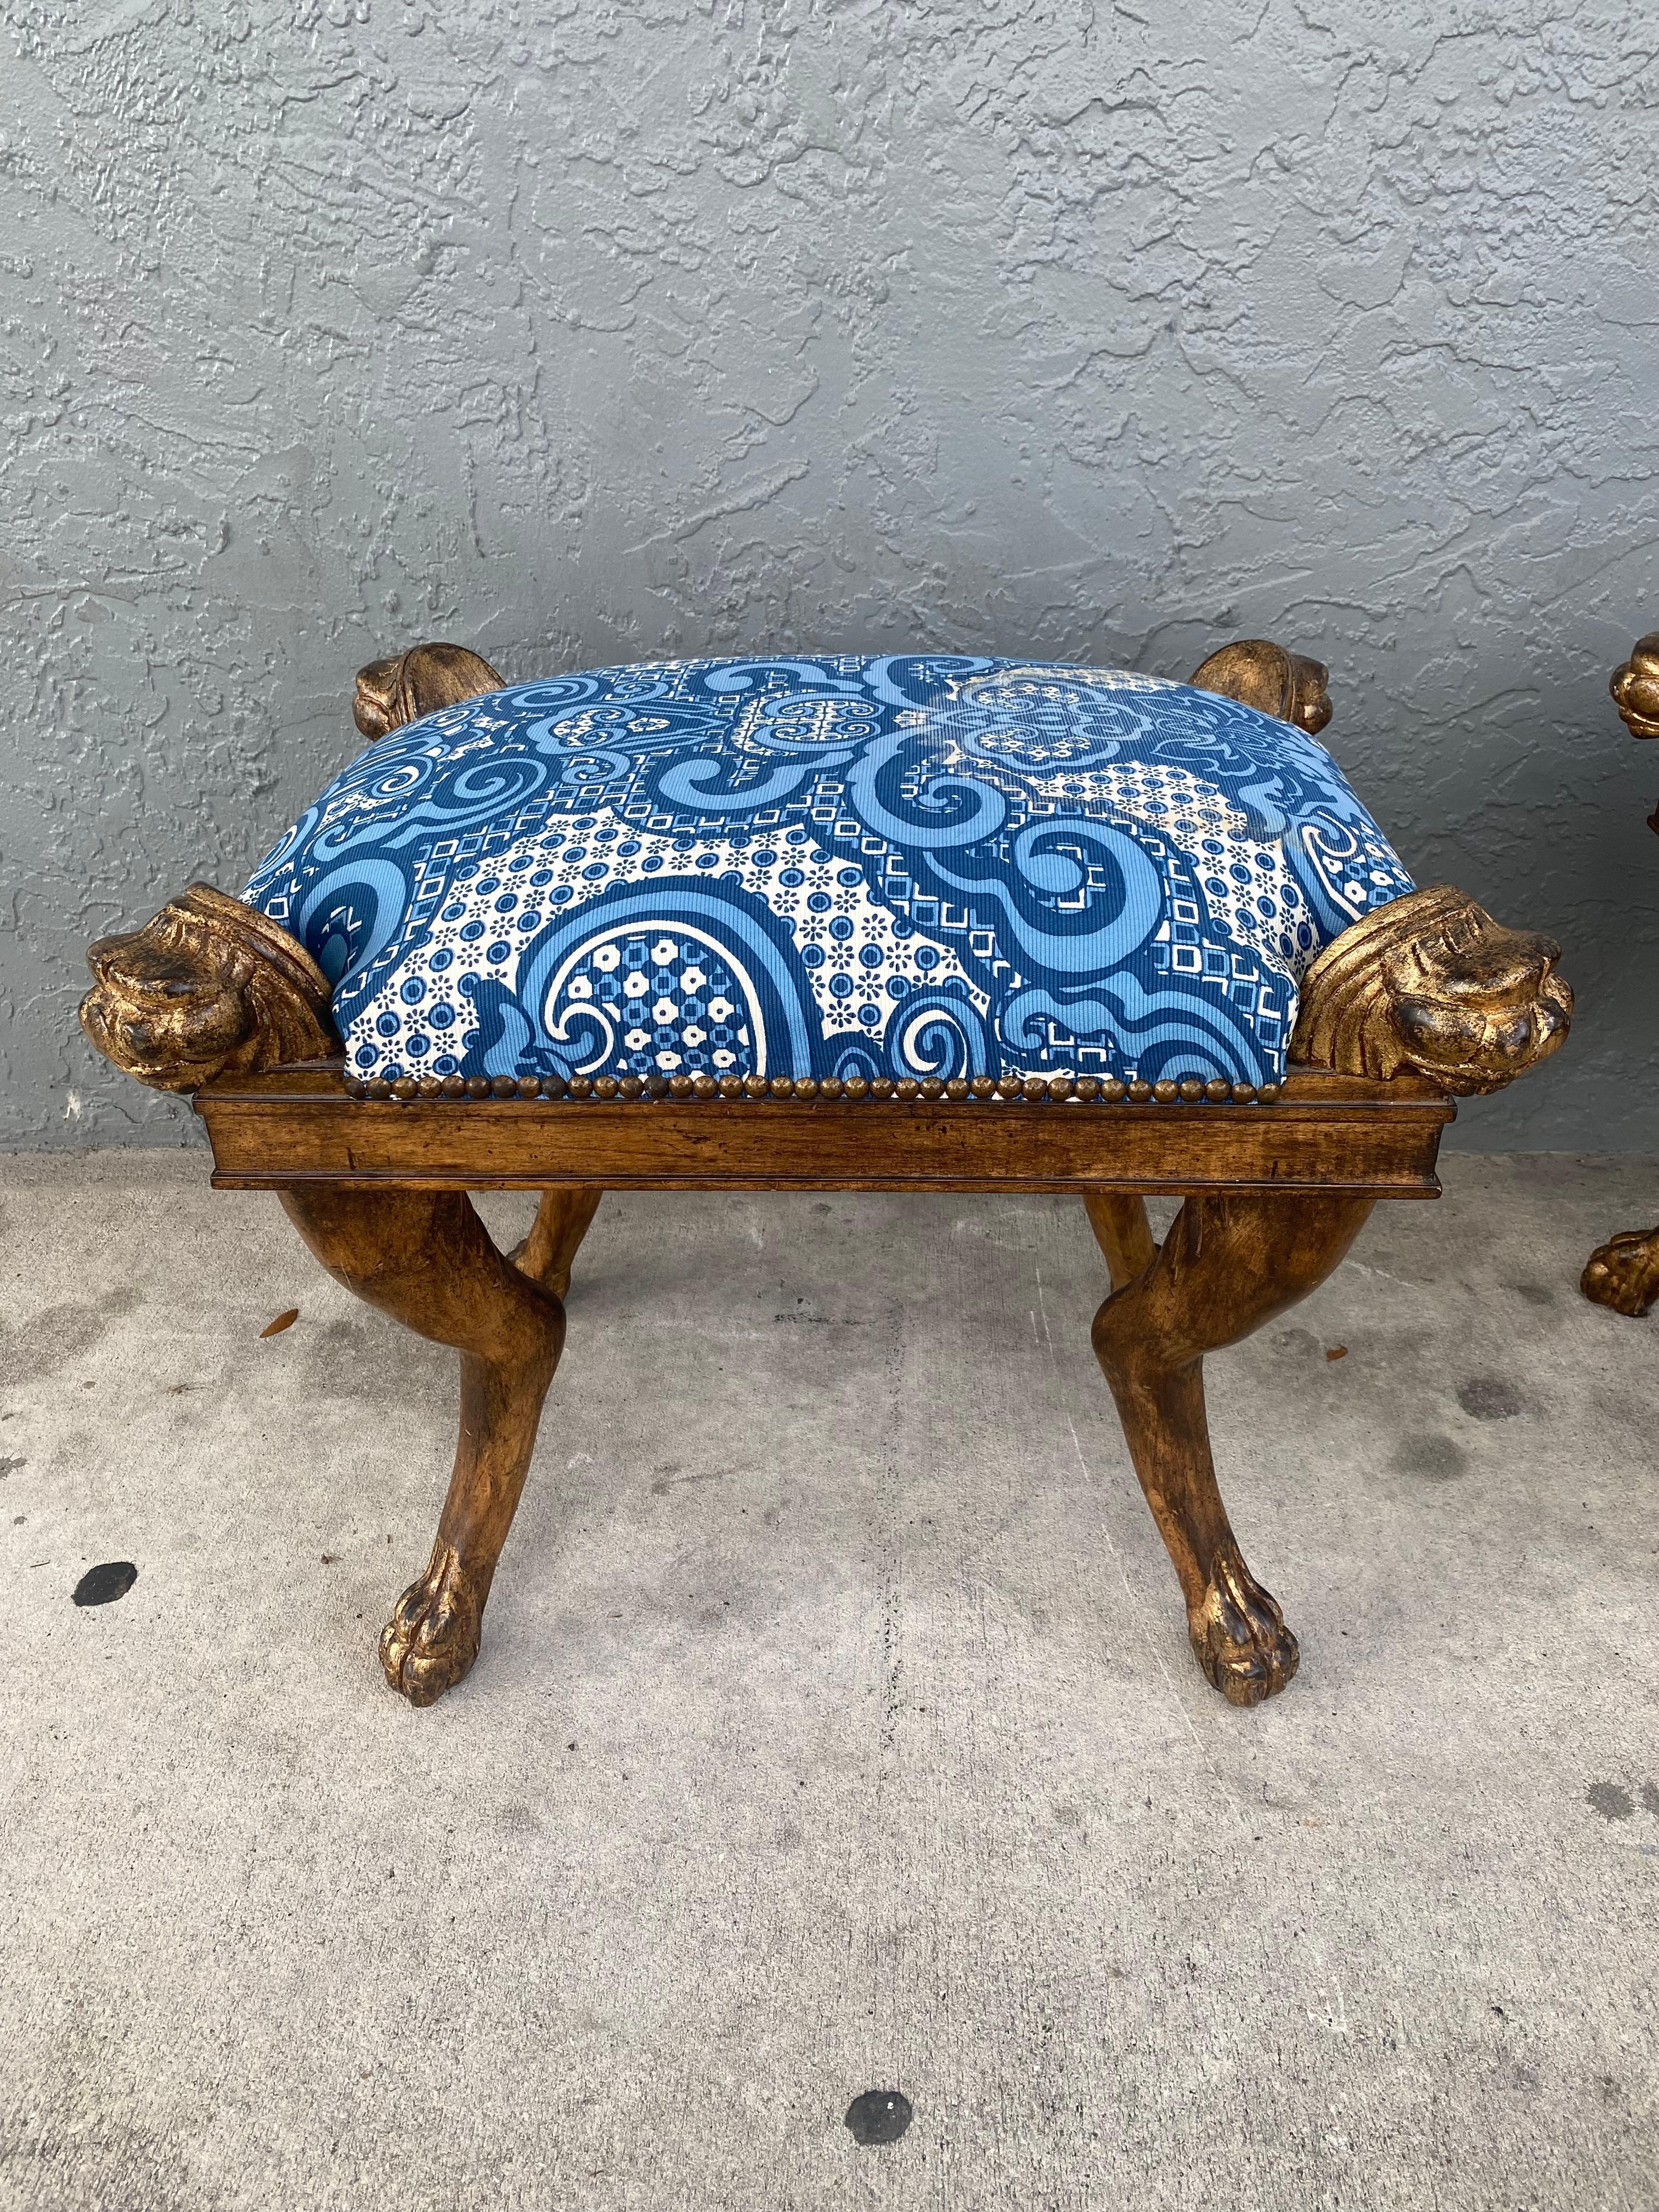 1960s Sculptural Carved Wood Lion Blue and White Bench Ottoman Stool For Sale 3